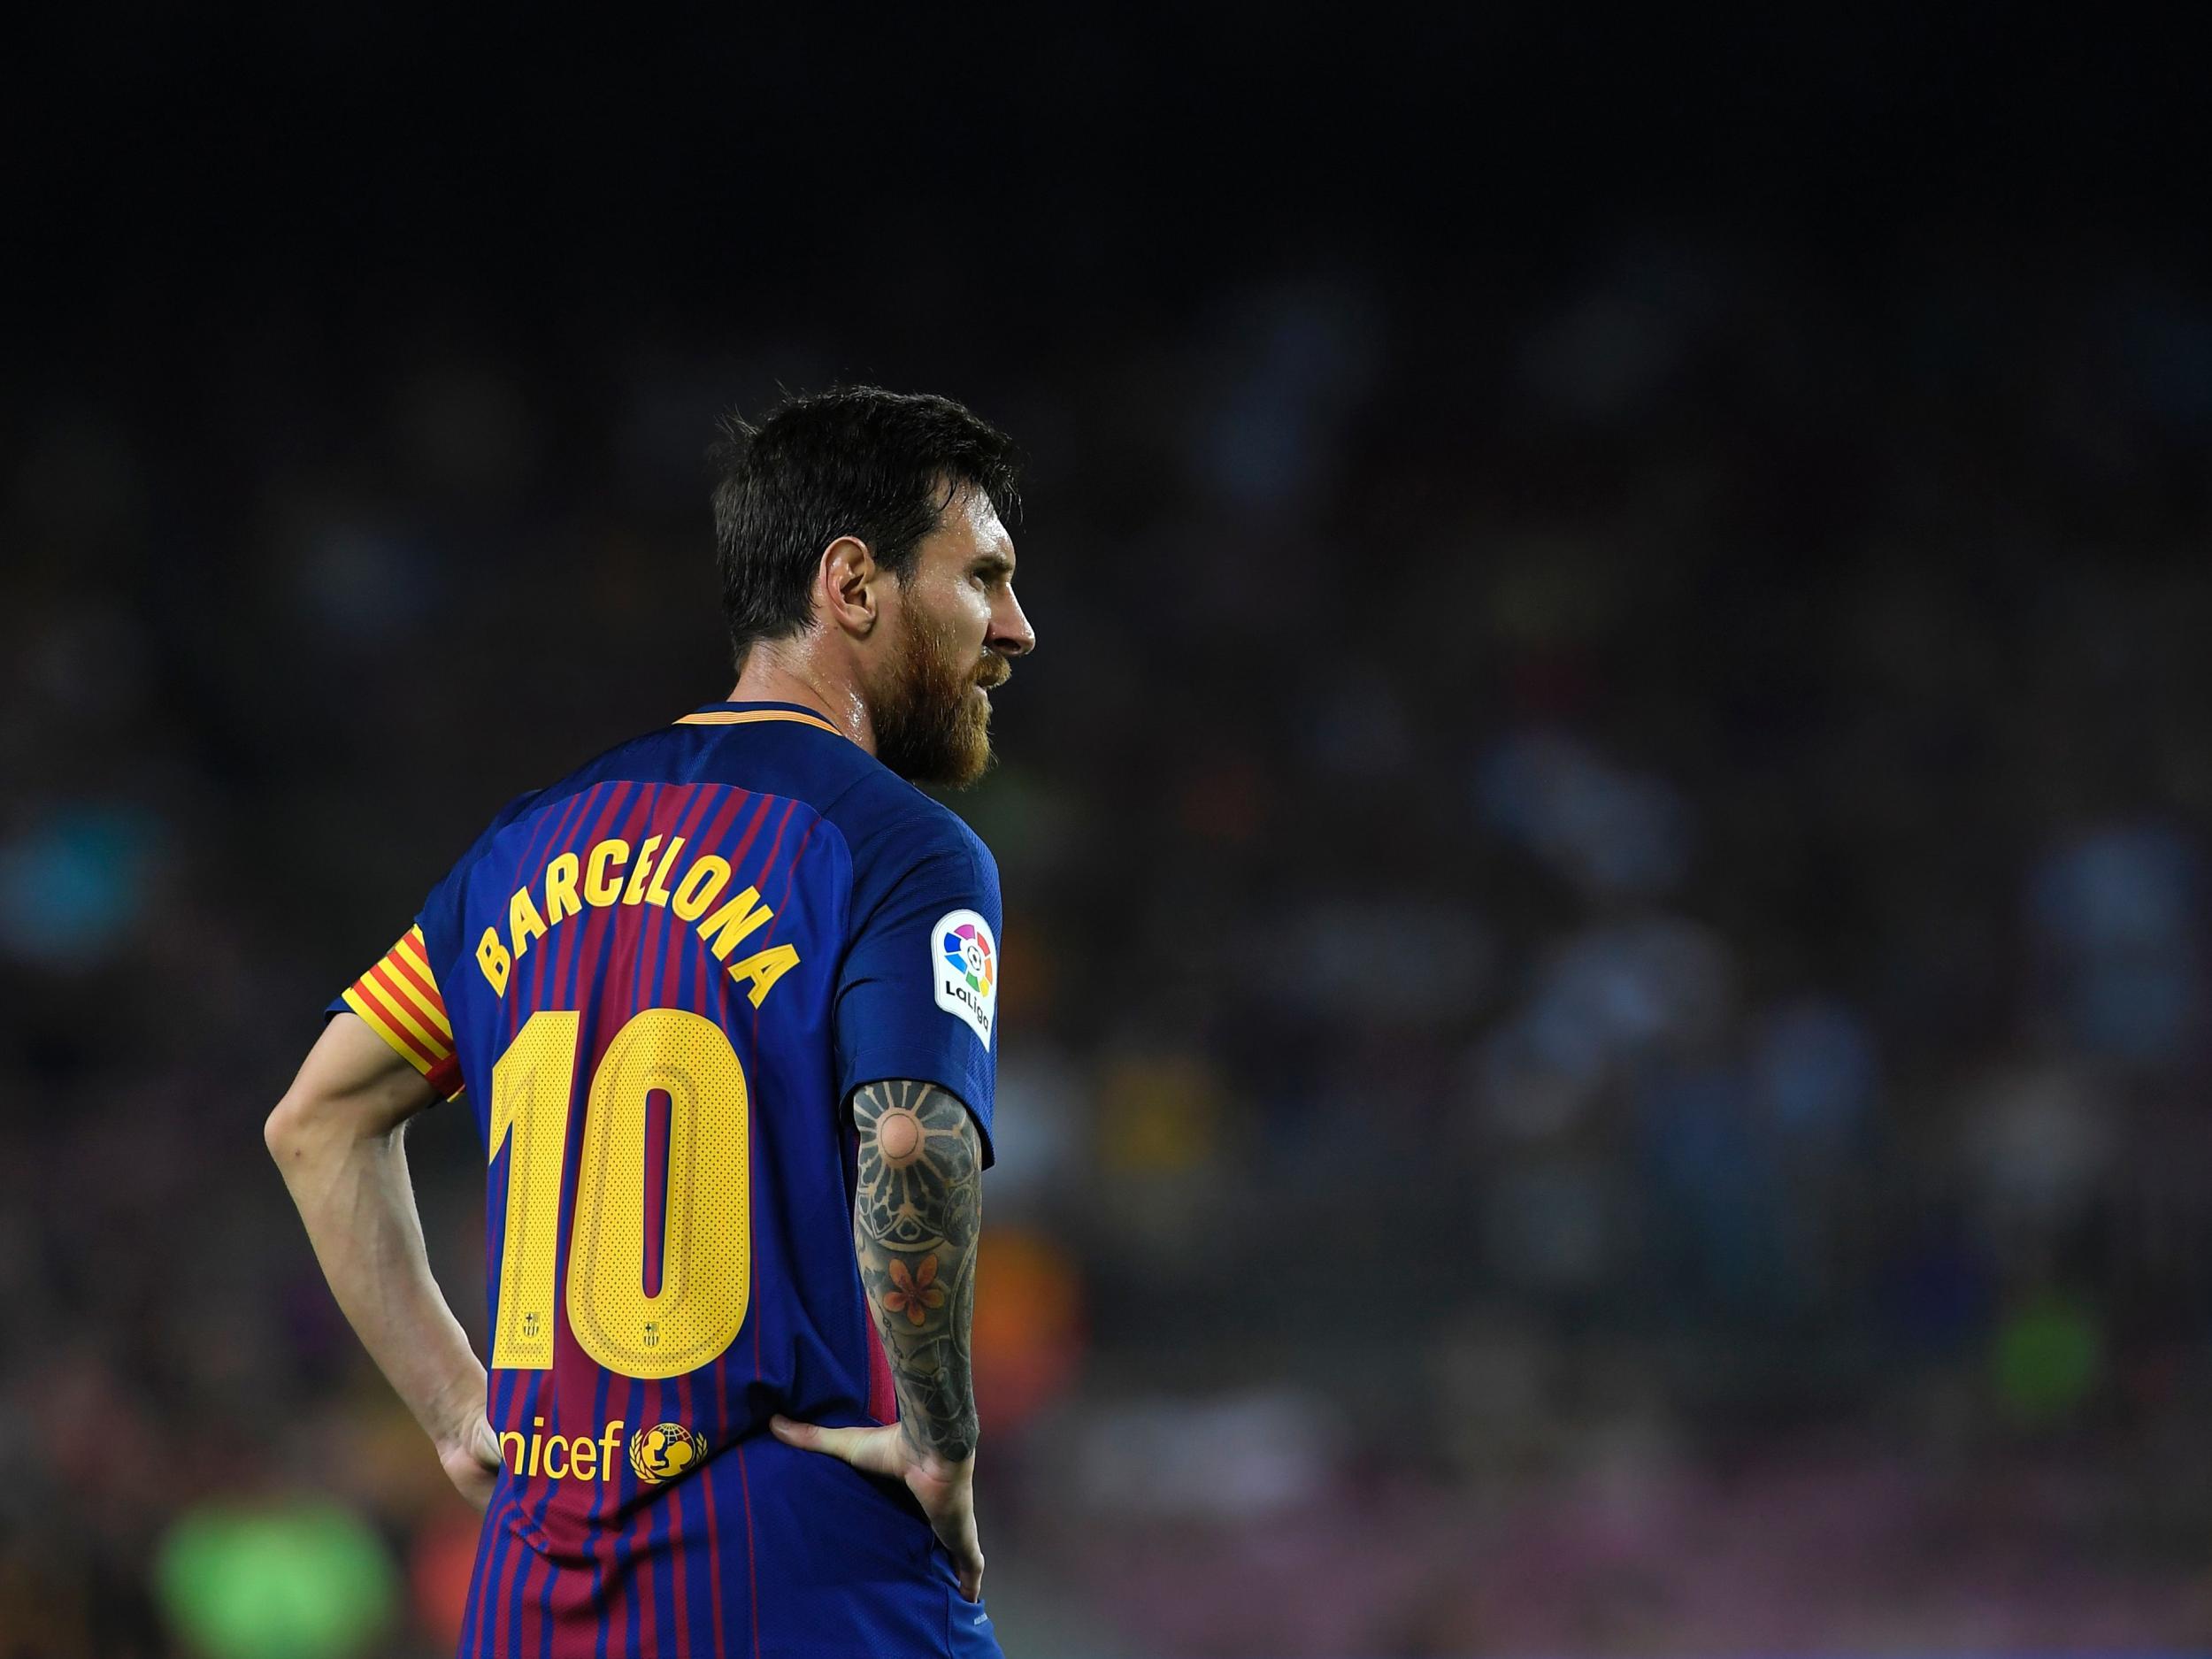 Manchester City have been the club most often linked with a move for Lionel Messi